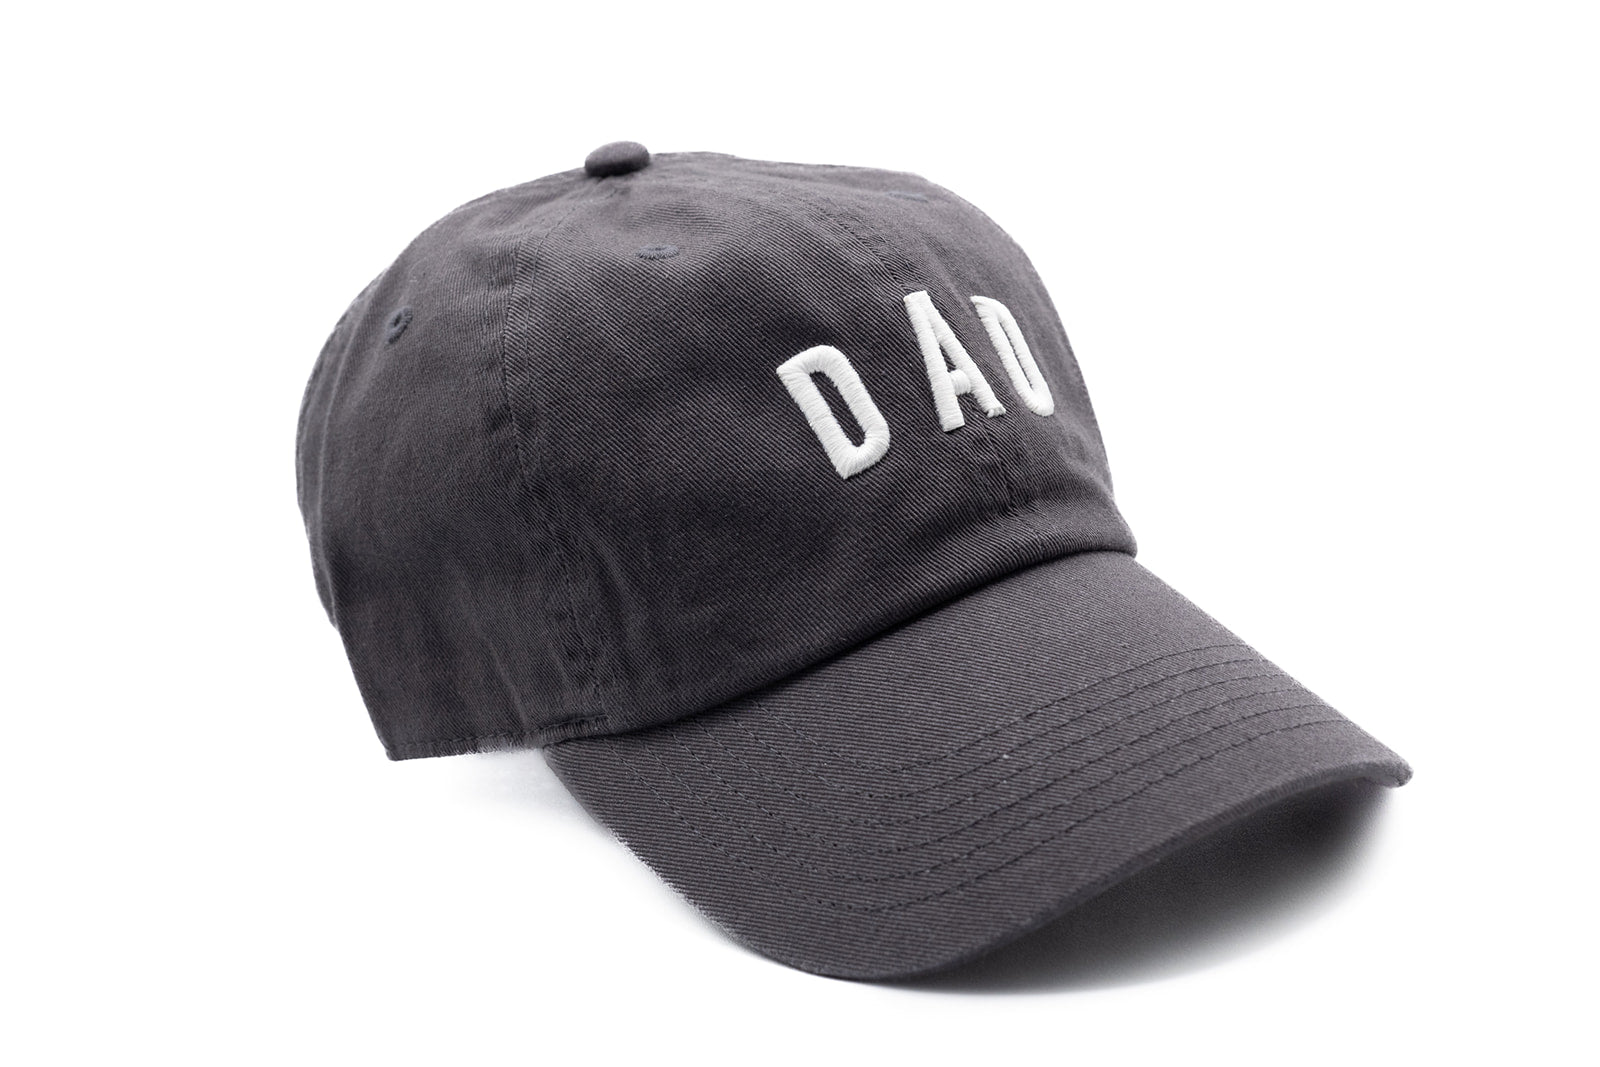 Charcoal Dad Hat